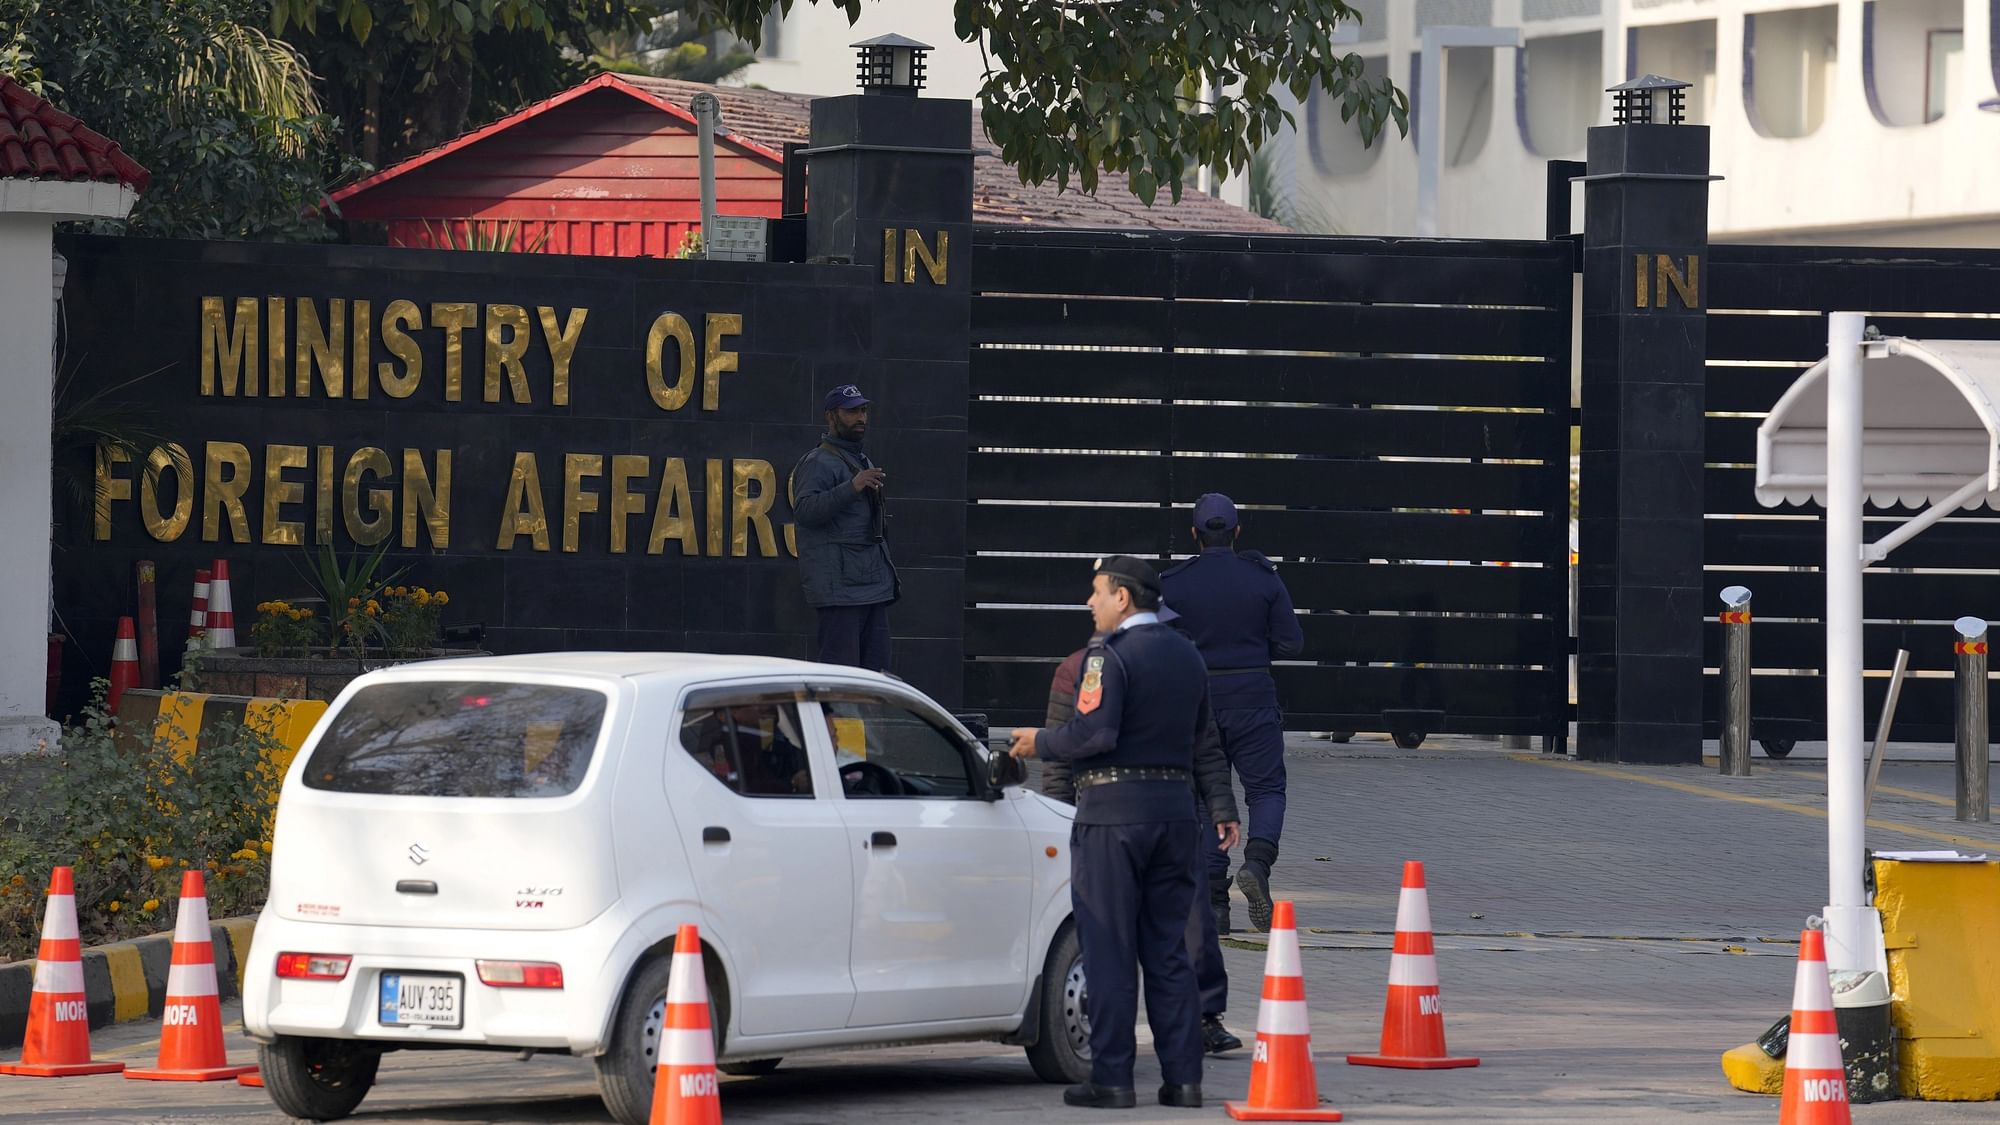 <div class="paragraphs"><p>Police officers search a car at the main entry gate of Pakistan's Ministry of Foreign Affairs, in Islamabad, Pakistan.</p></div>